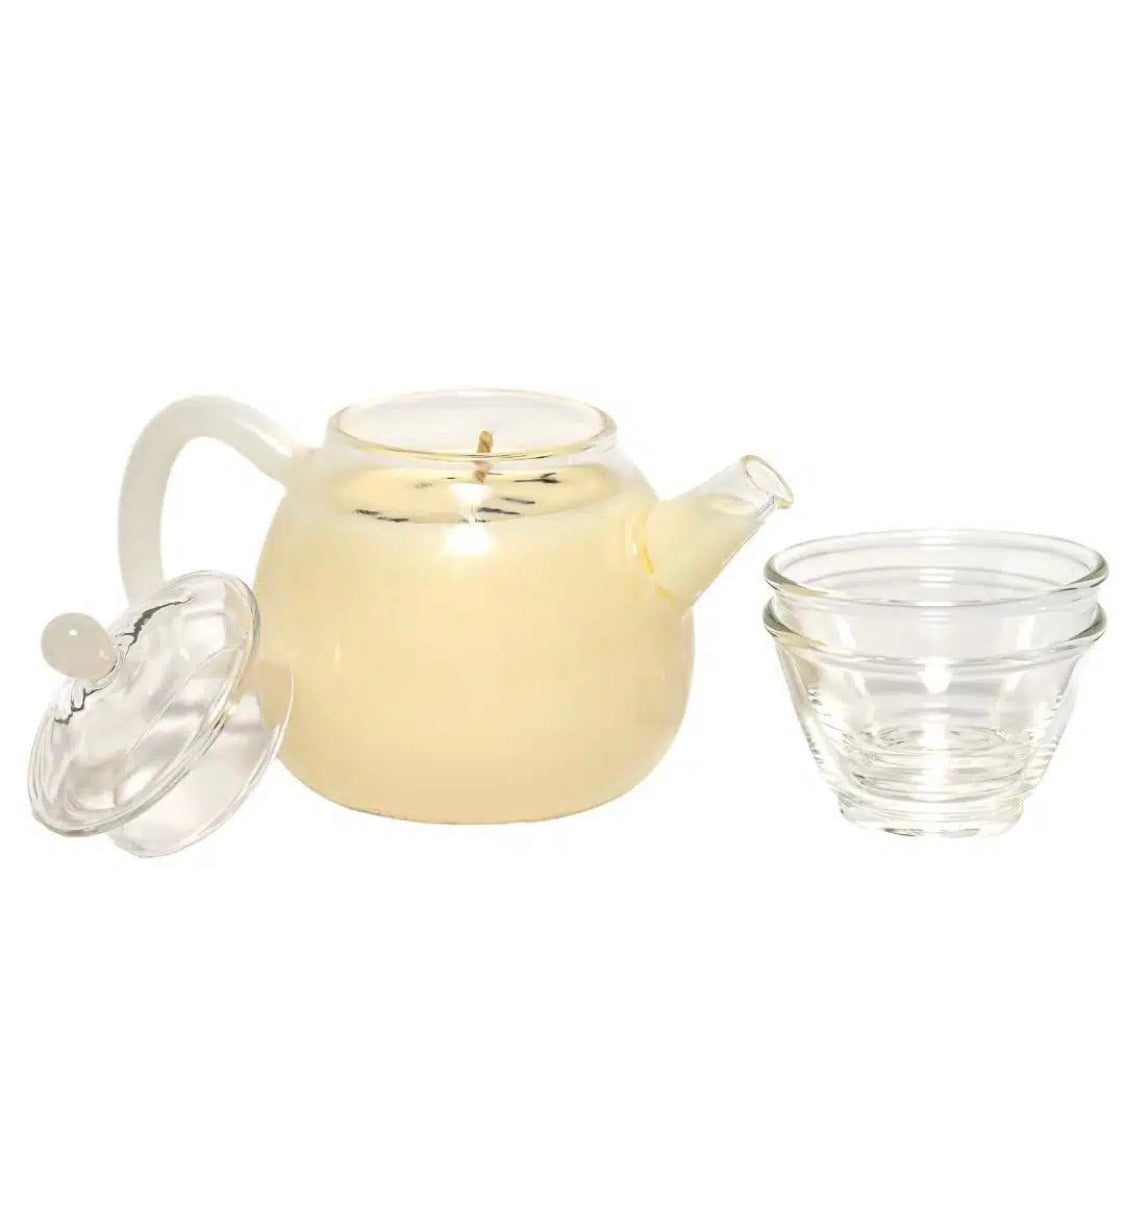 A cozy glass tea pot set filled white soy candle wax and two clear glass tea cups displayed on a rustic wooden round tray, beside a potted green plant on a wooden surface.